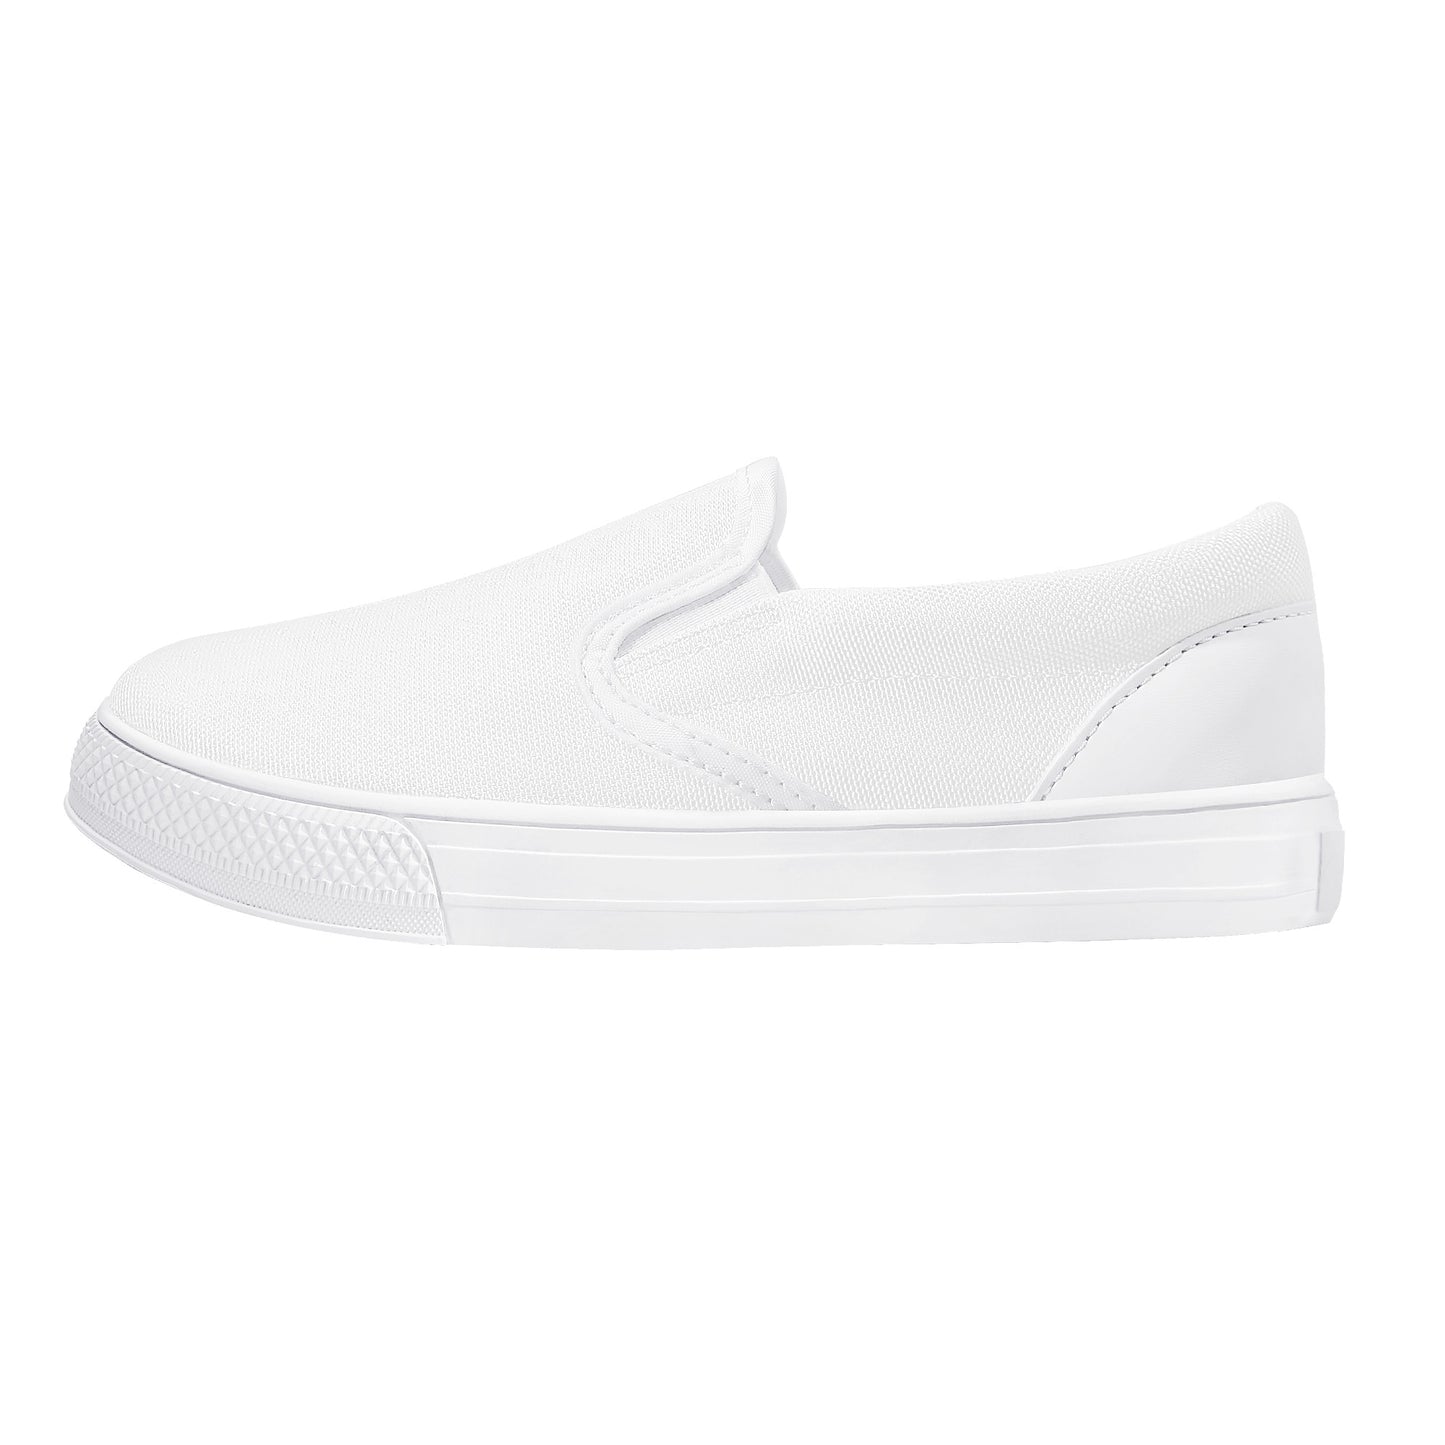 Create Your Own Kids Slip On Shoes -White